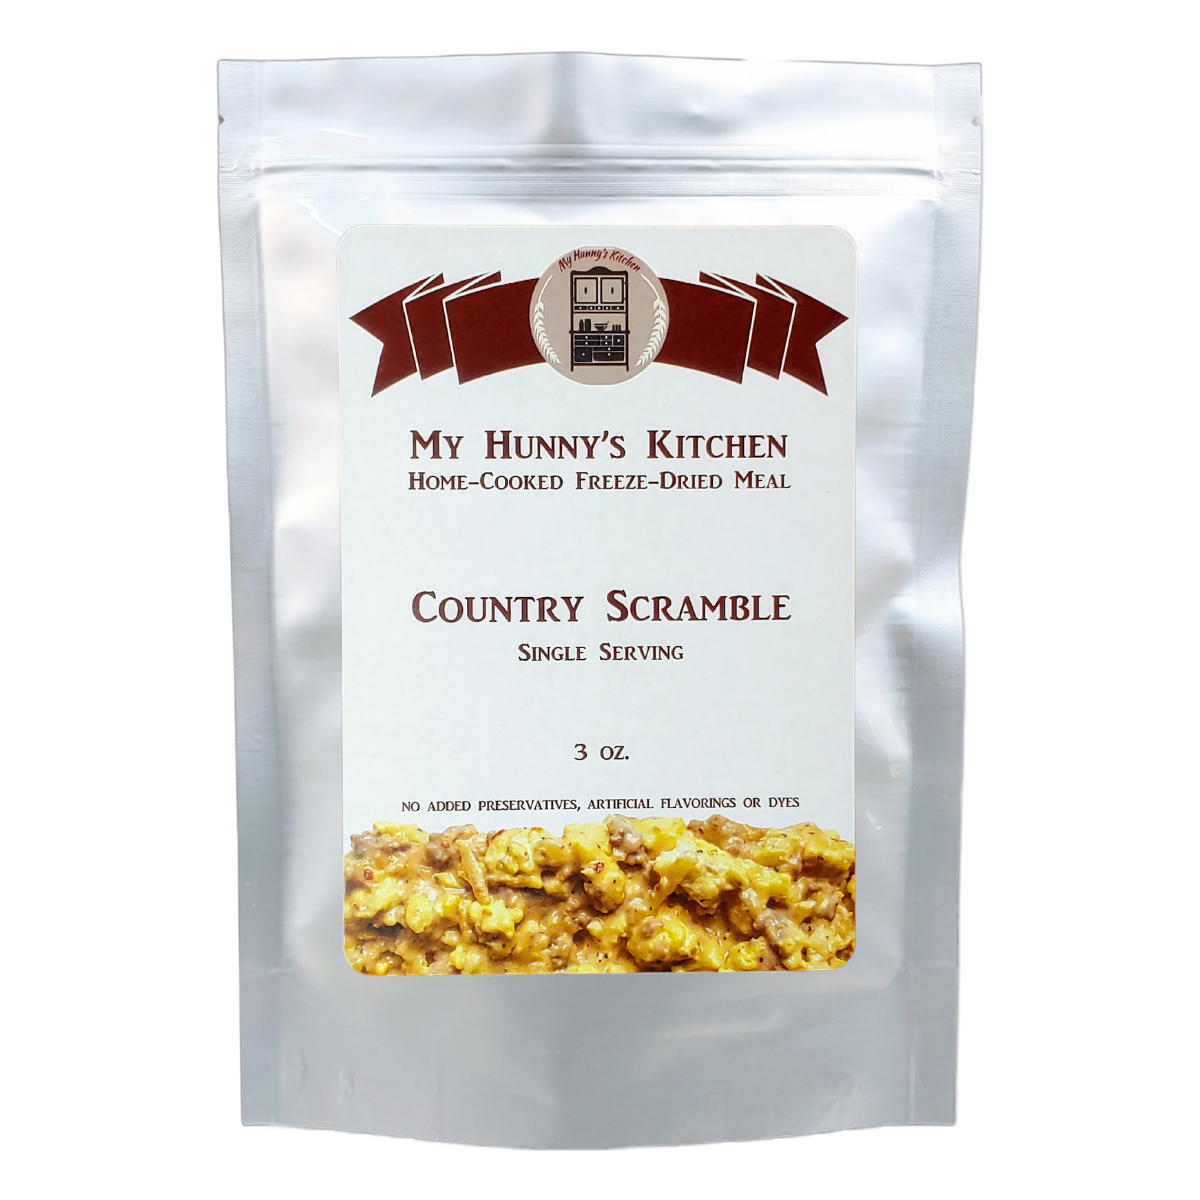 Country Scramble Freeze Dried Meal packaging